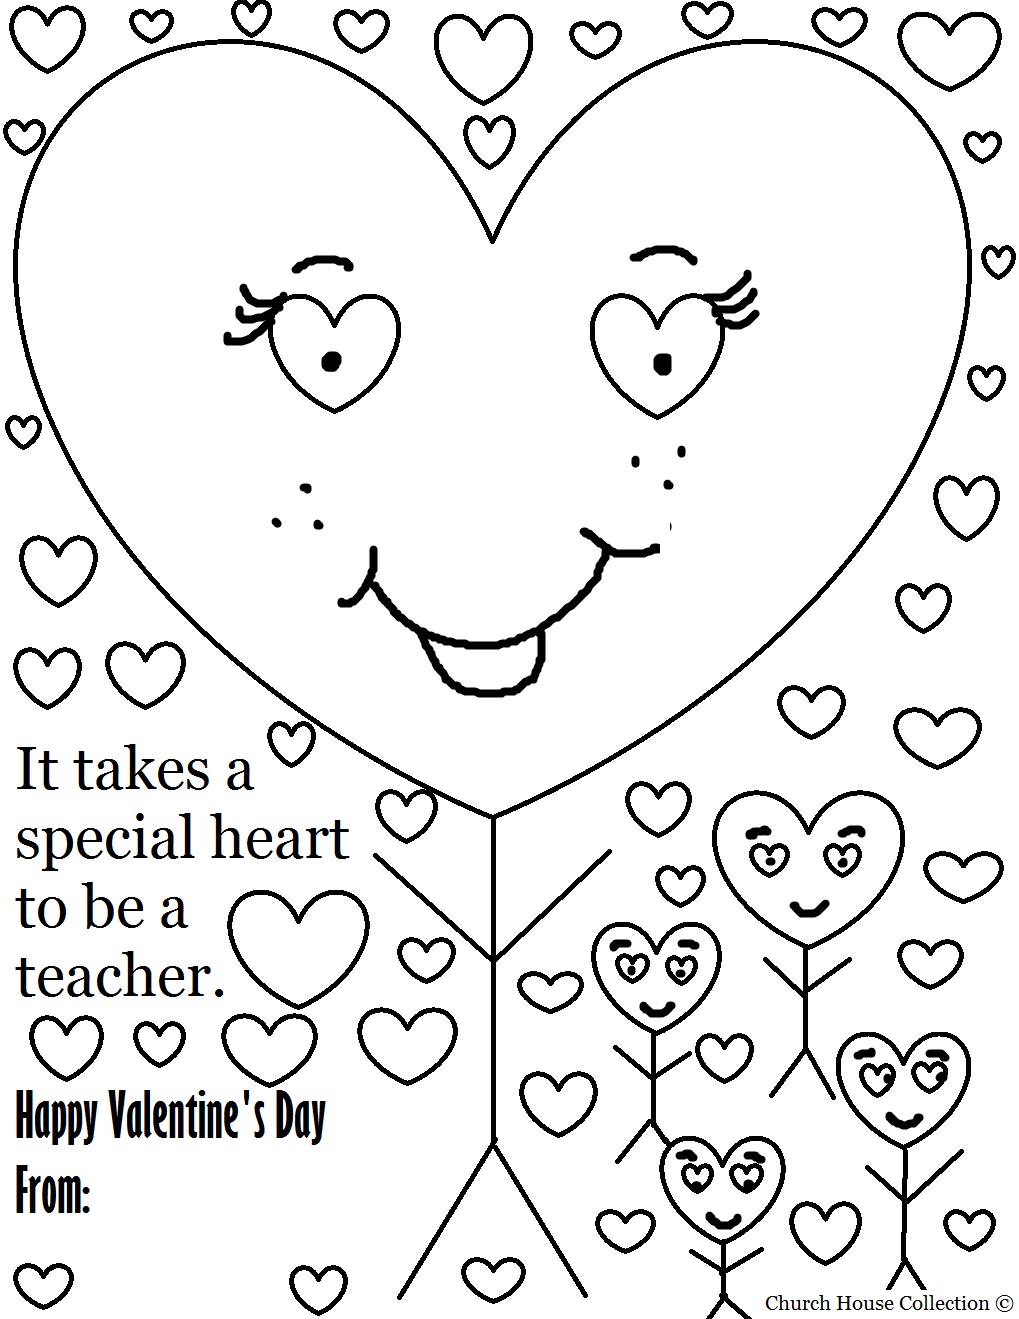 Teacher Valentine's Day Coloring Pages - Get Coloring Pages